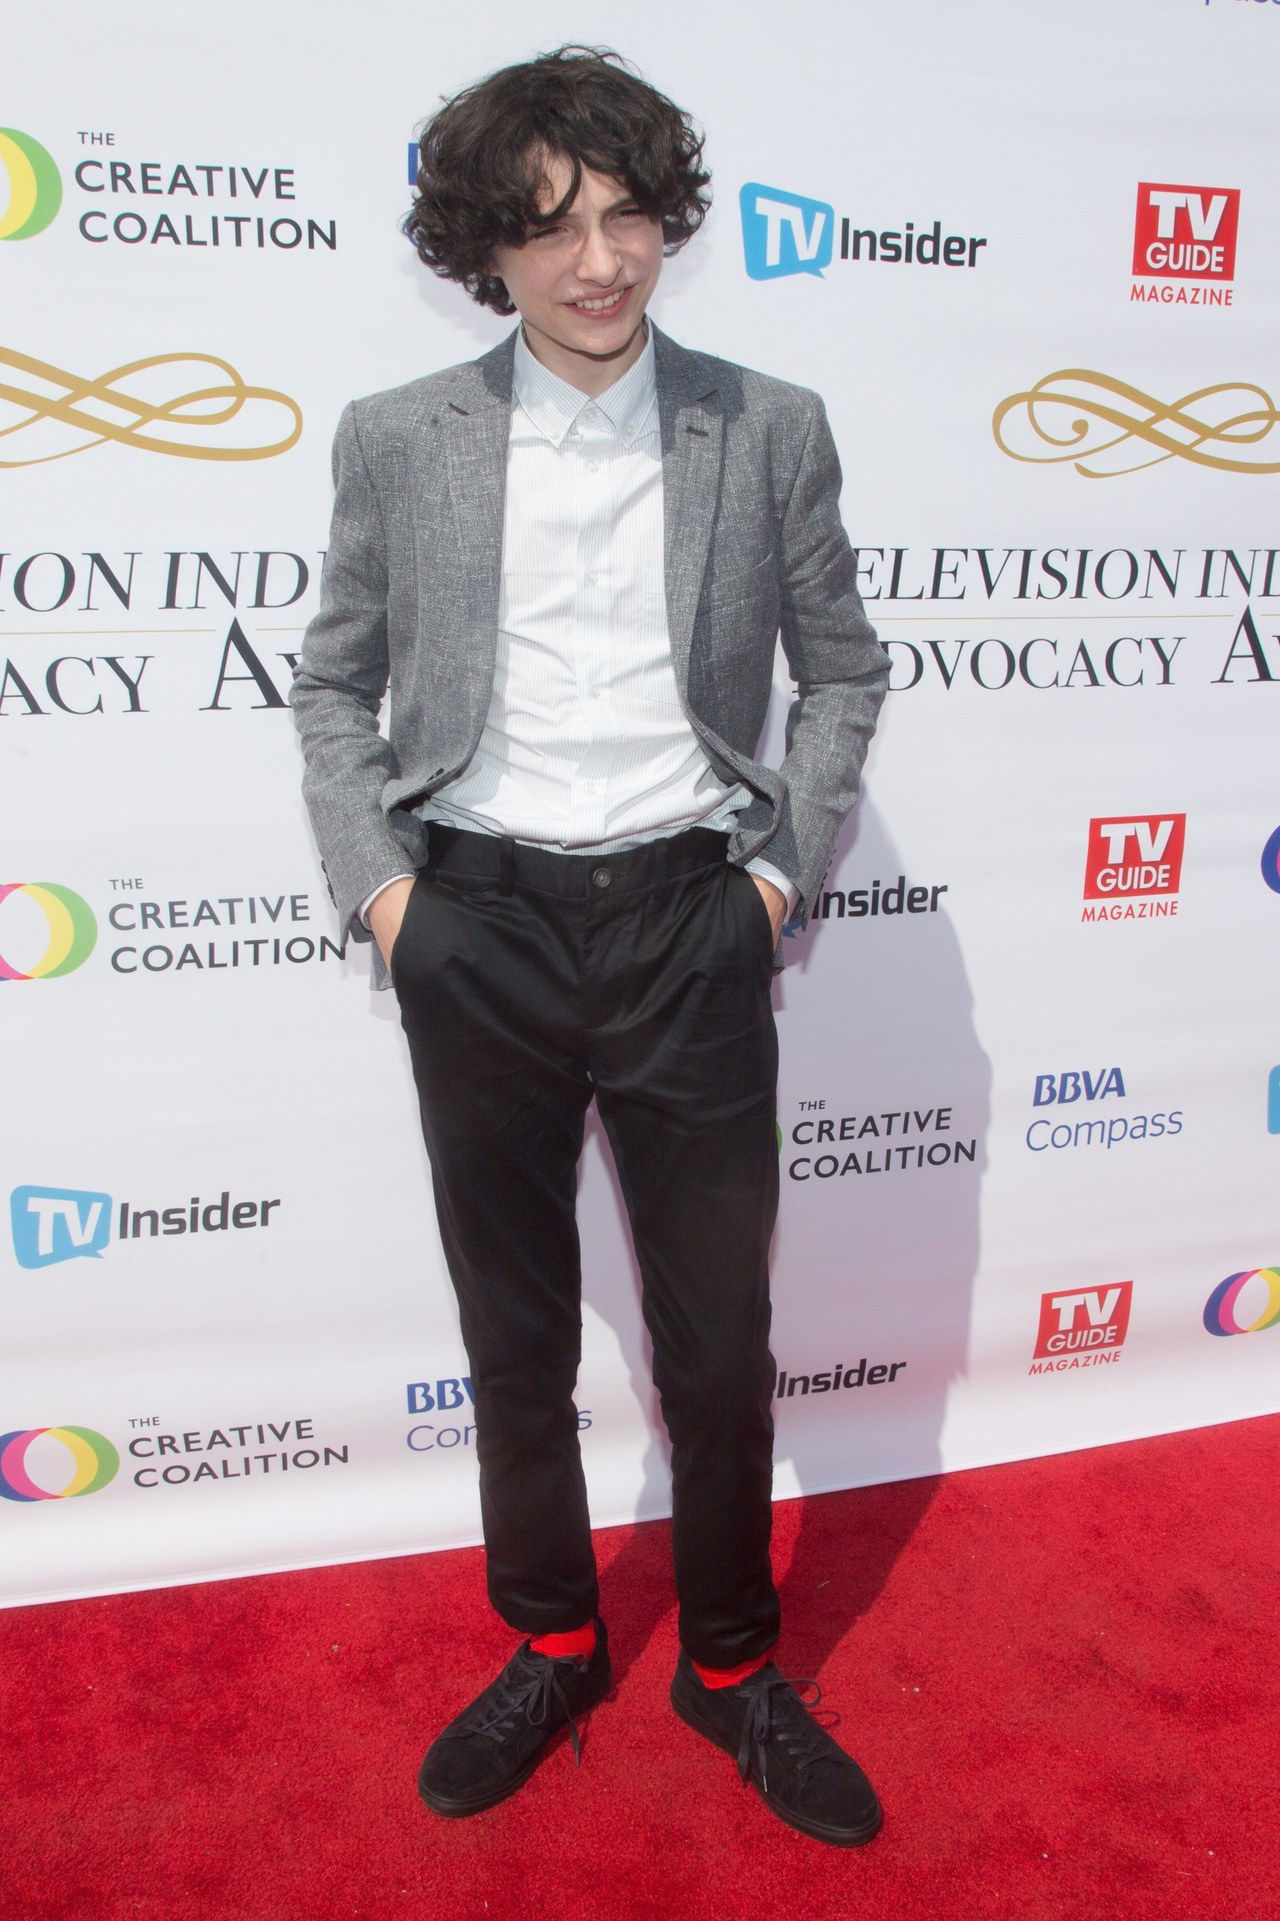 Television Industry Advocacy Awards - Arrivals